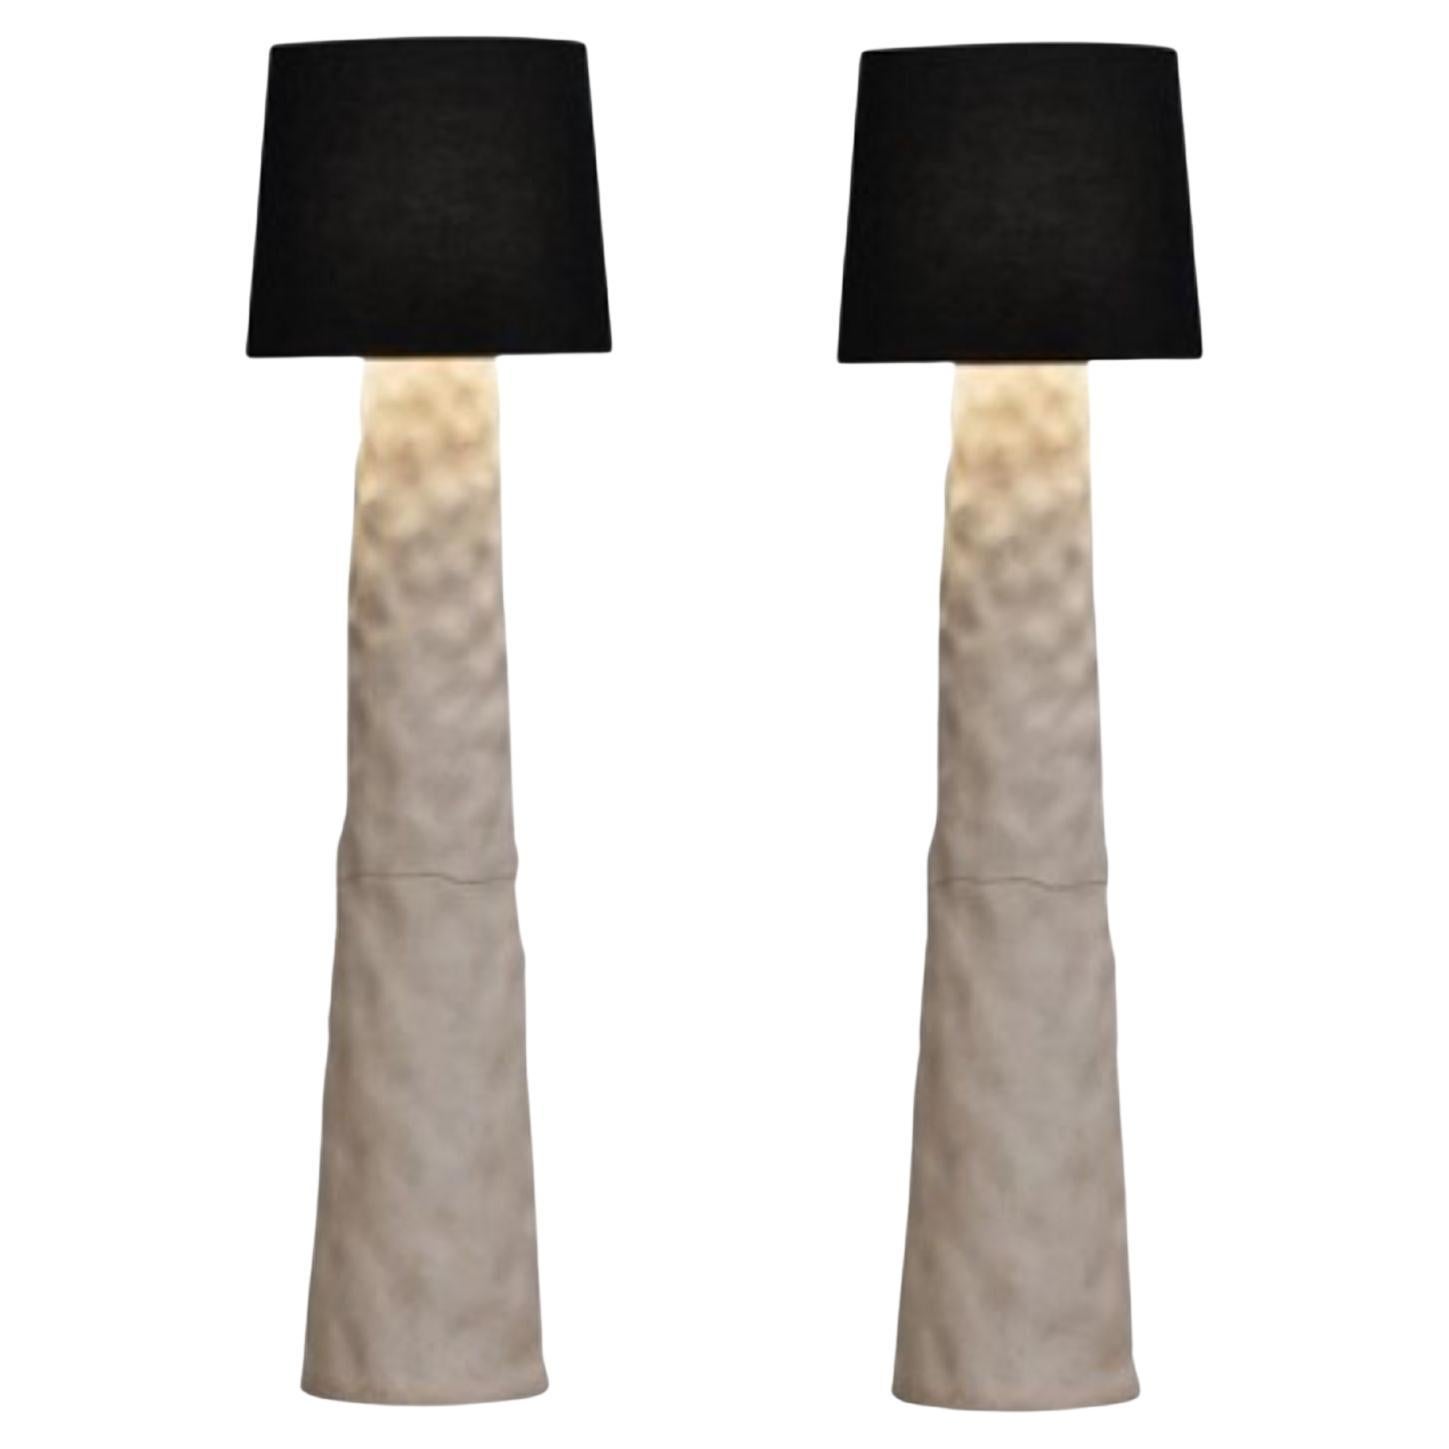 Set of 2 Contemporary Floor Lamps by Faina